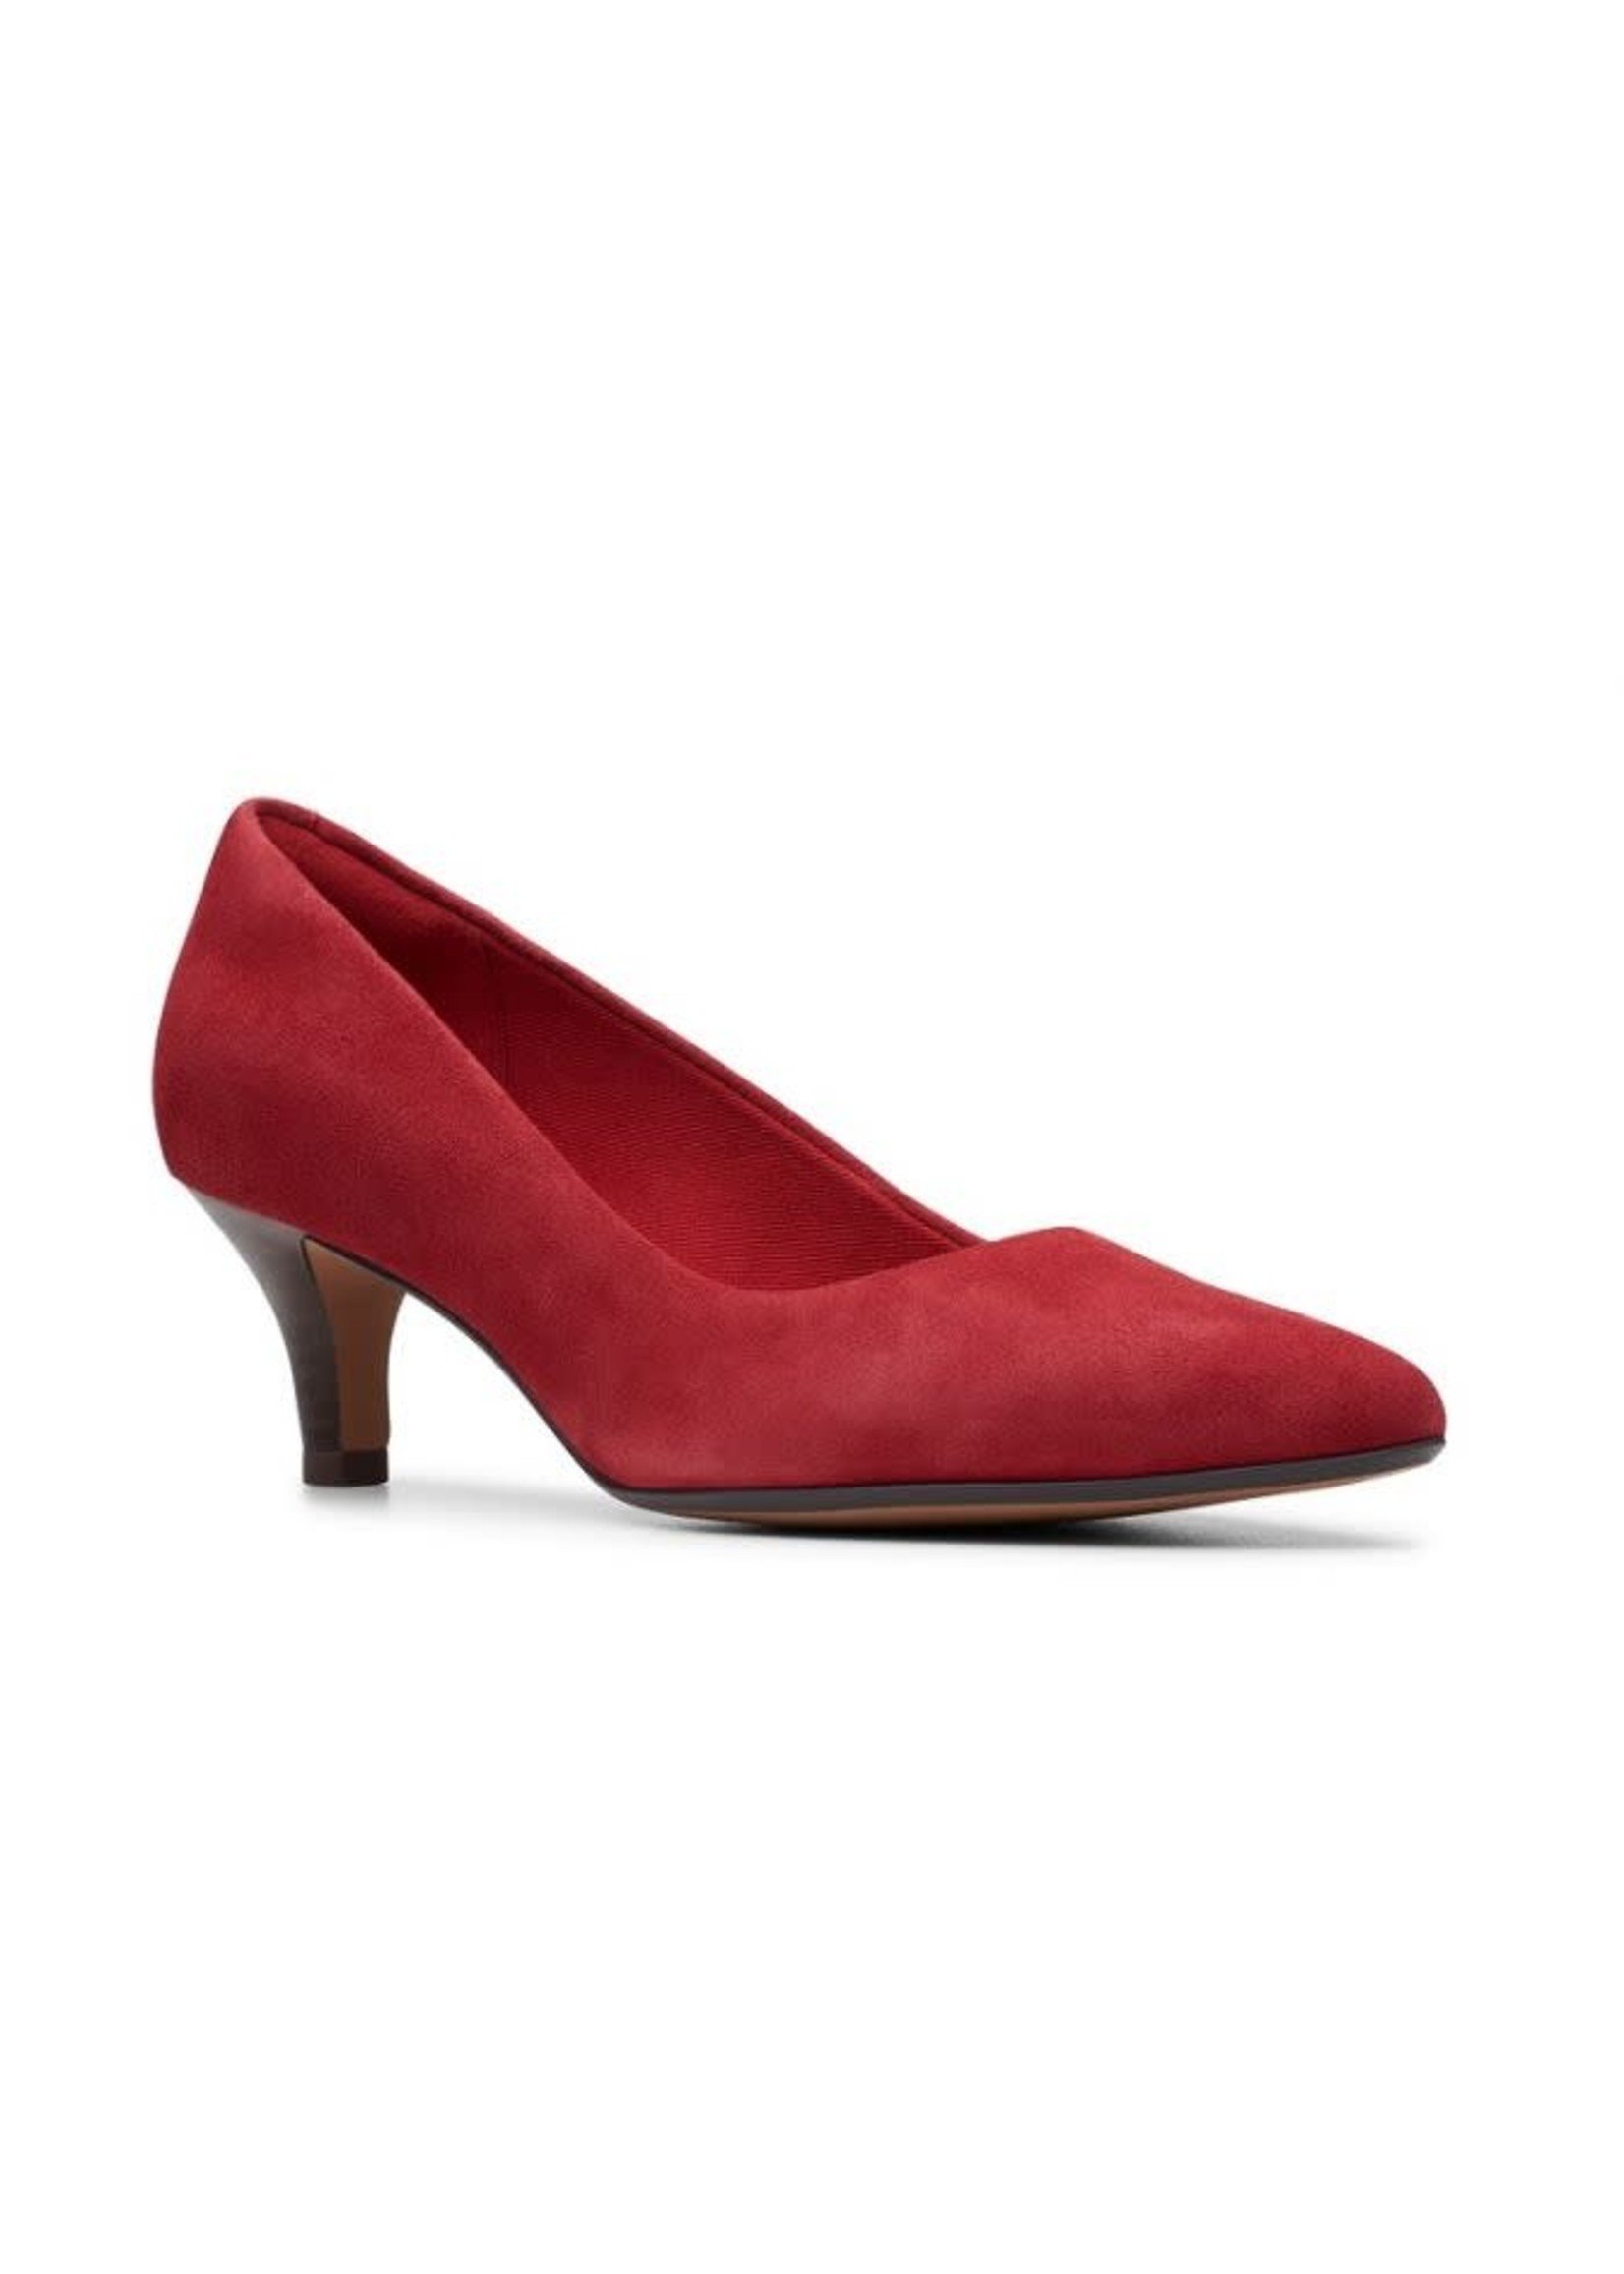 Linvale Jerica Cherry Red Pump - PHINNEYS